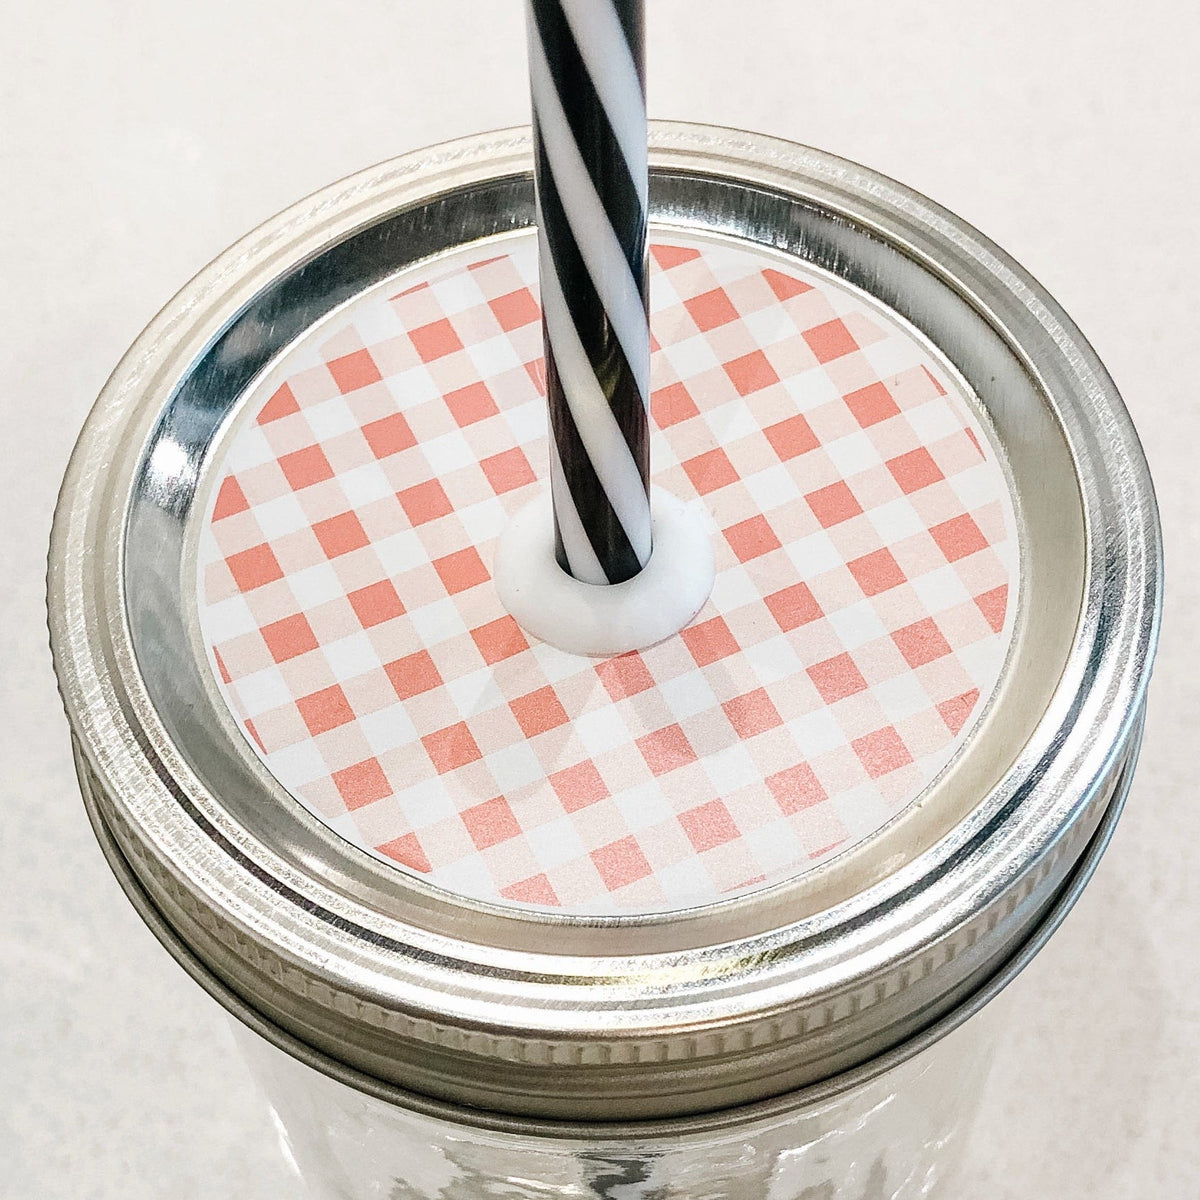 A closer look of a white and peach checkered straw lid on a silver mason jar cover. It has a black and white striped straw and displayed on a white counter.